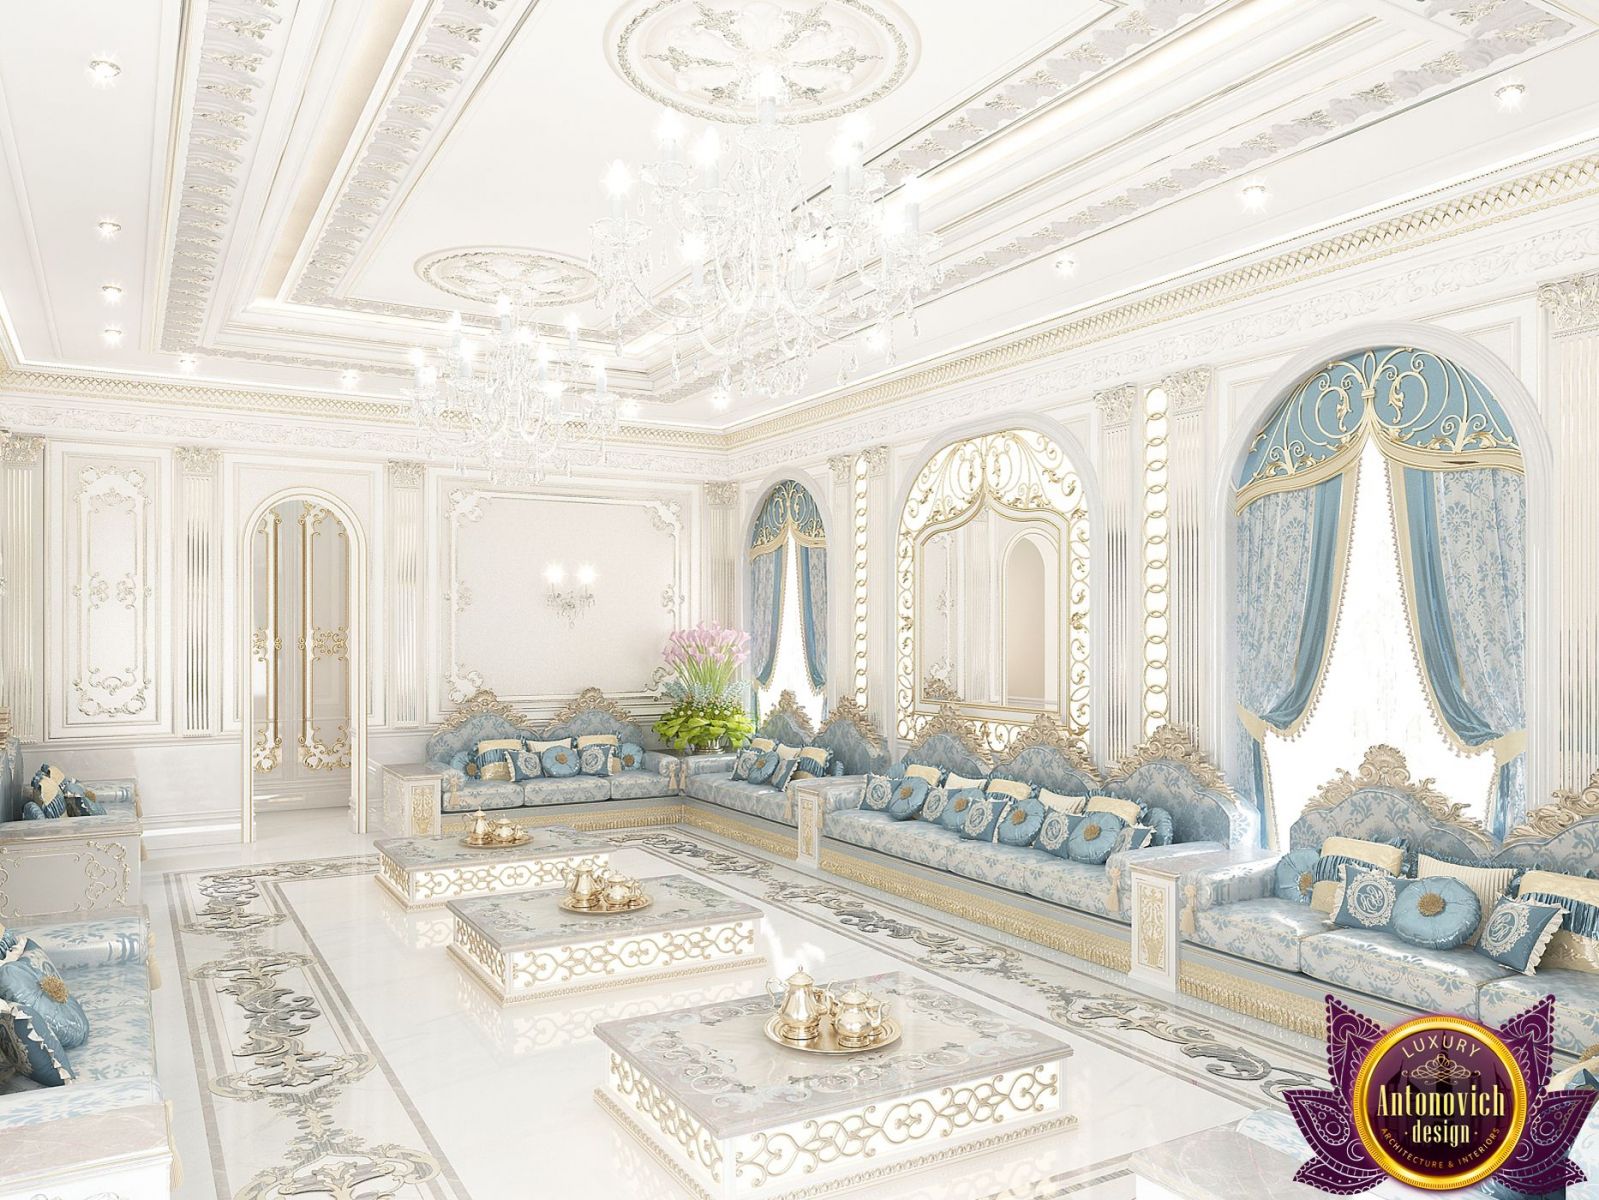 Discover the Most Luxurious Majlis Interior Designs Today!